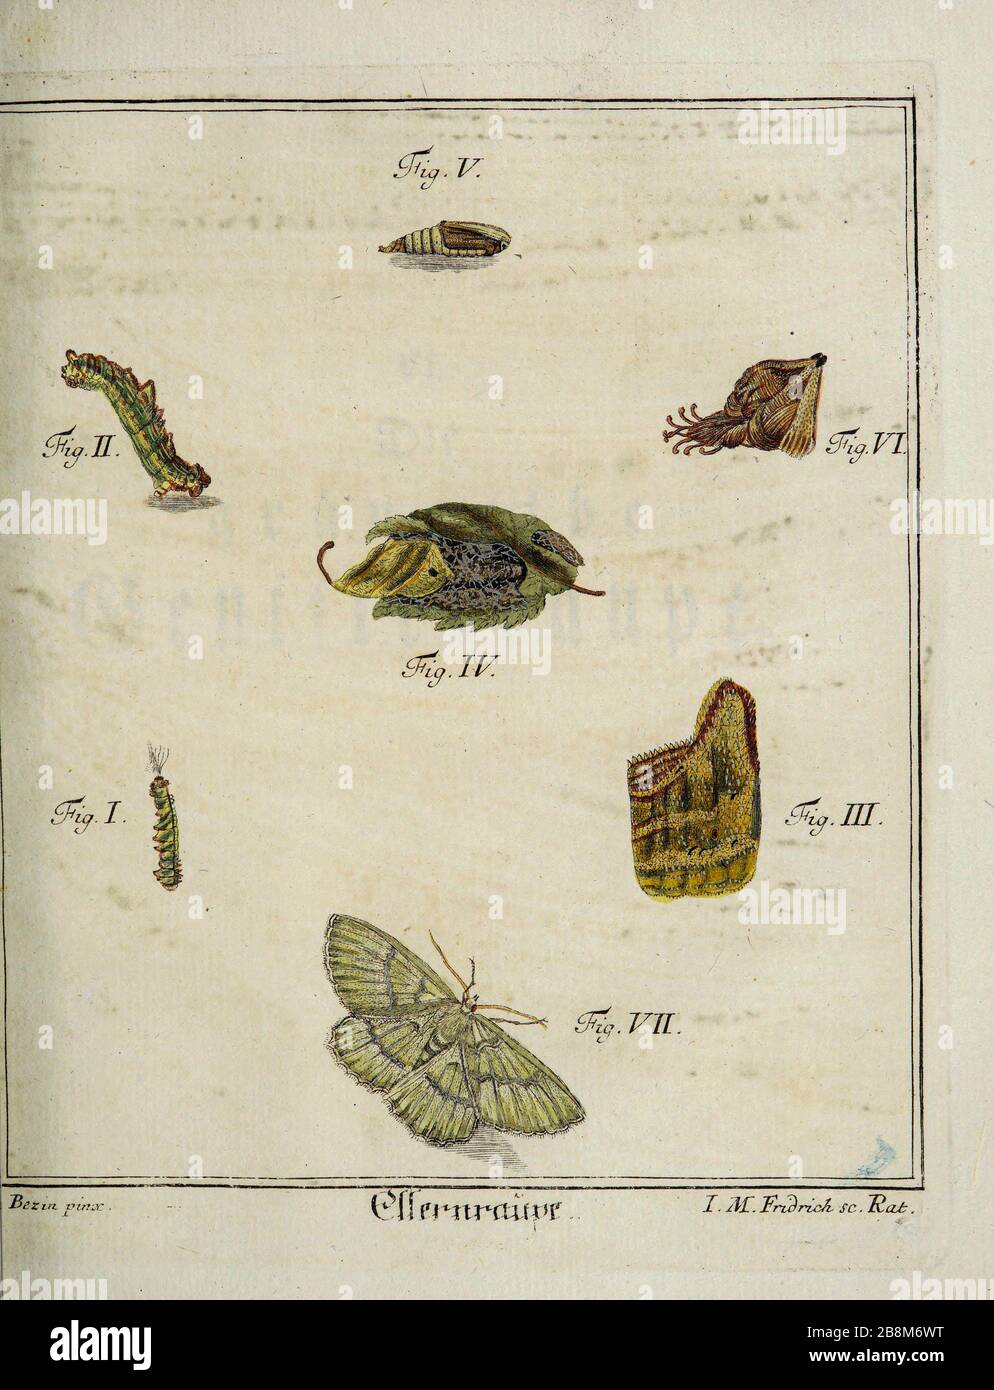 Butterflies and moths 18th century Entomology study from D. Jacob Christian Schaffers Abhandlungen von Insecten (Treatises on insects) published in 1764 by Schäffer, Jacob Christian, 1718-1790 Second addition Printed in Germany in 1797 Stock Photo